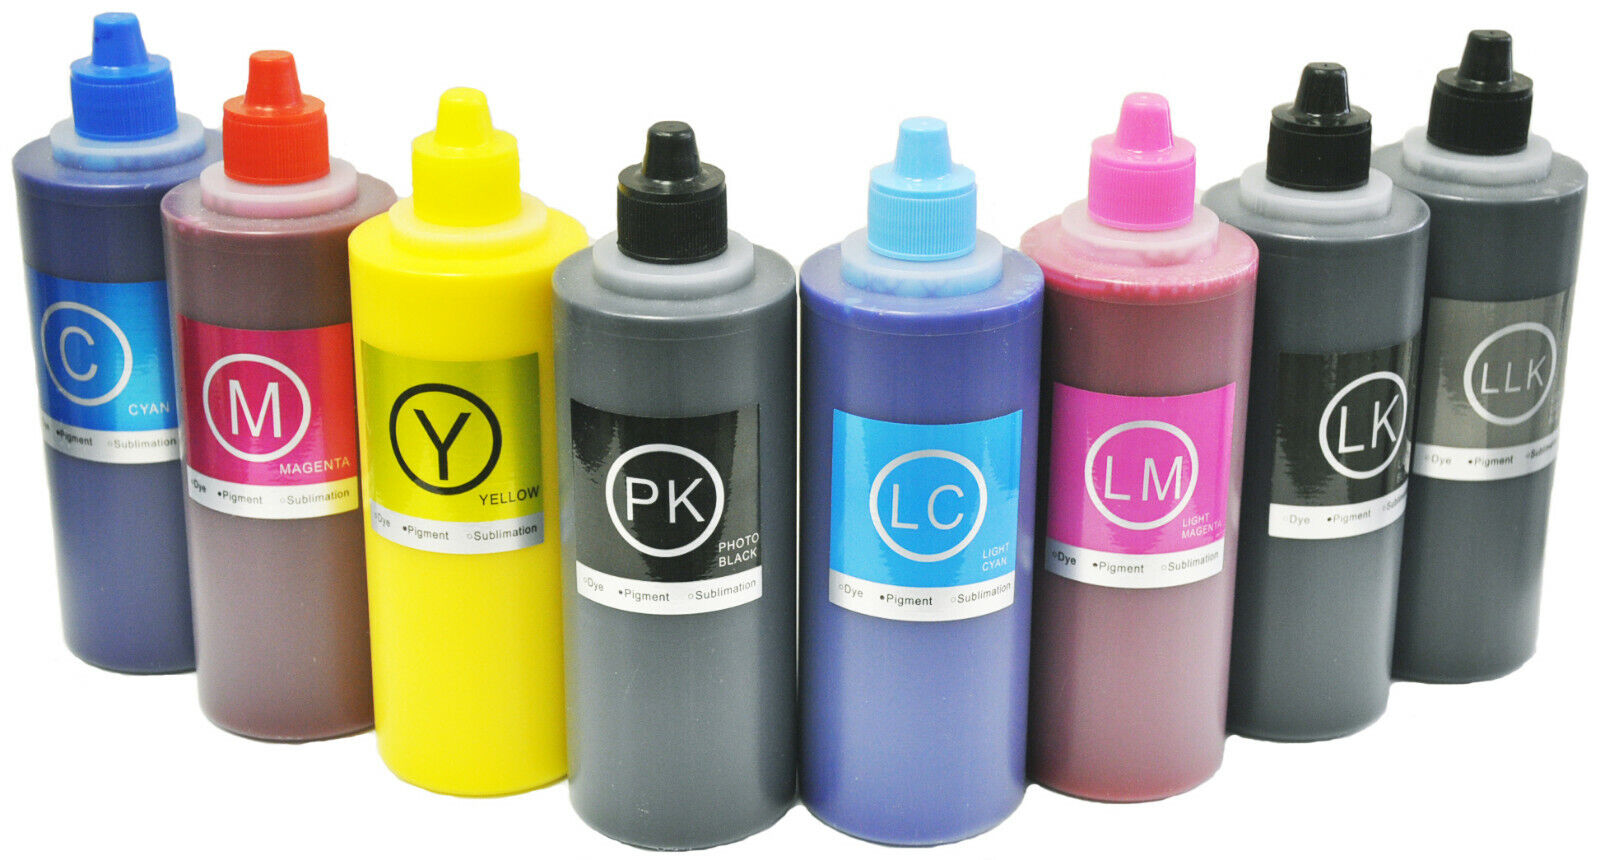 8x100ml UltraChrome K3 Pigment Compatible Ink for Pro 2880 3880 4880 7880 9880